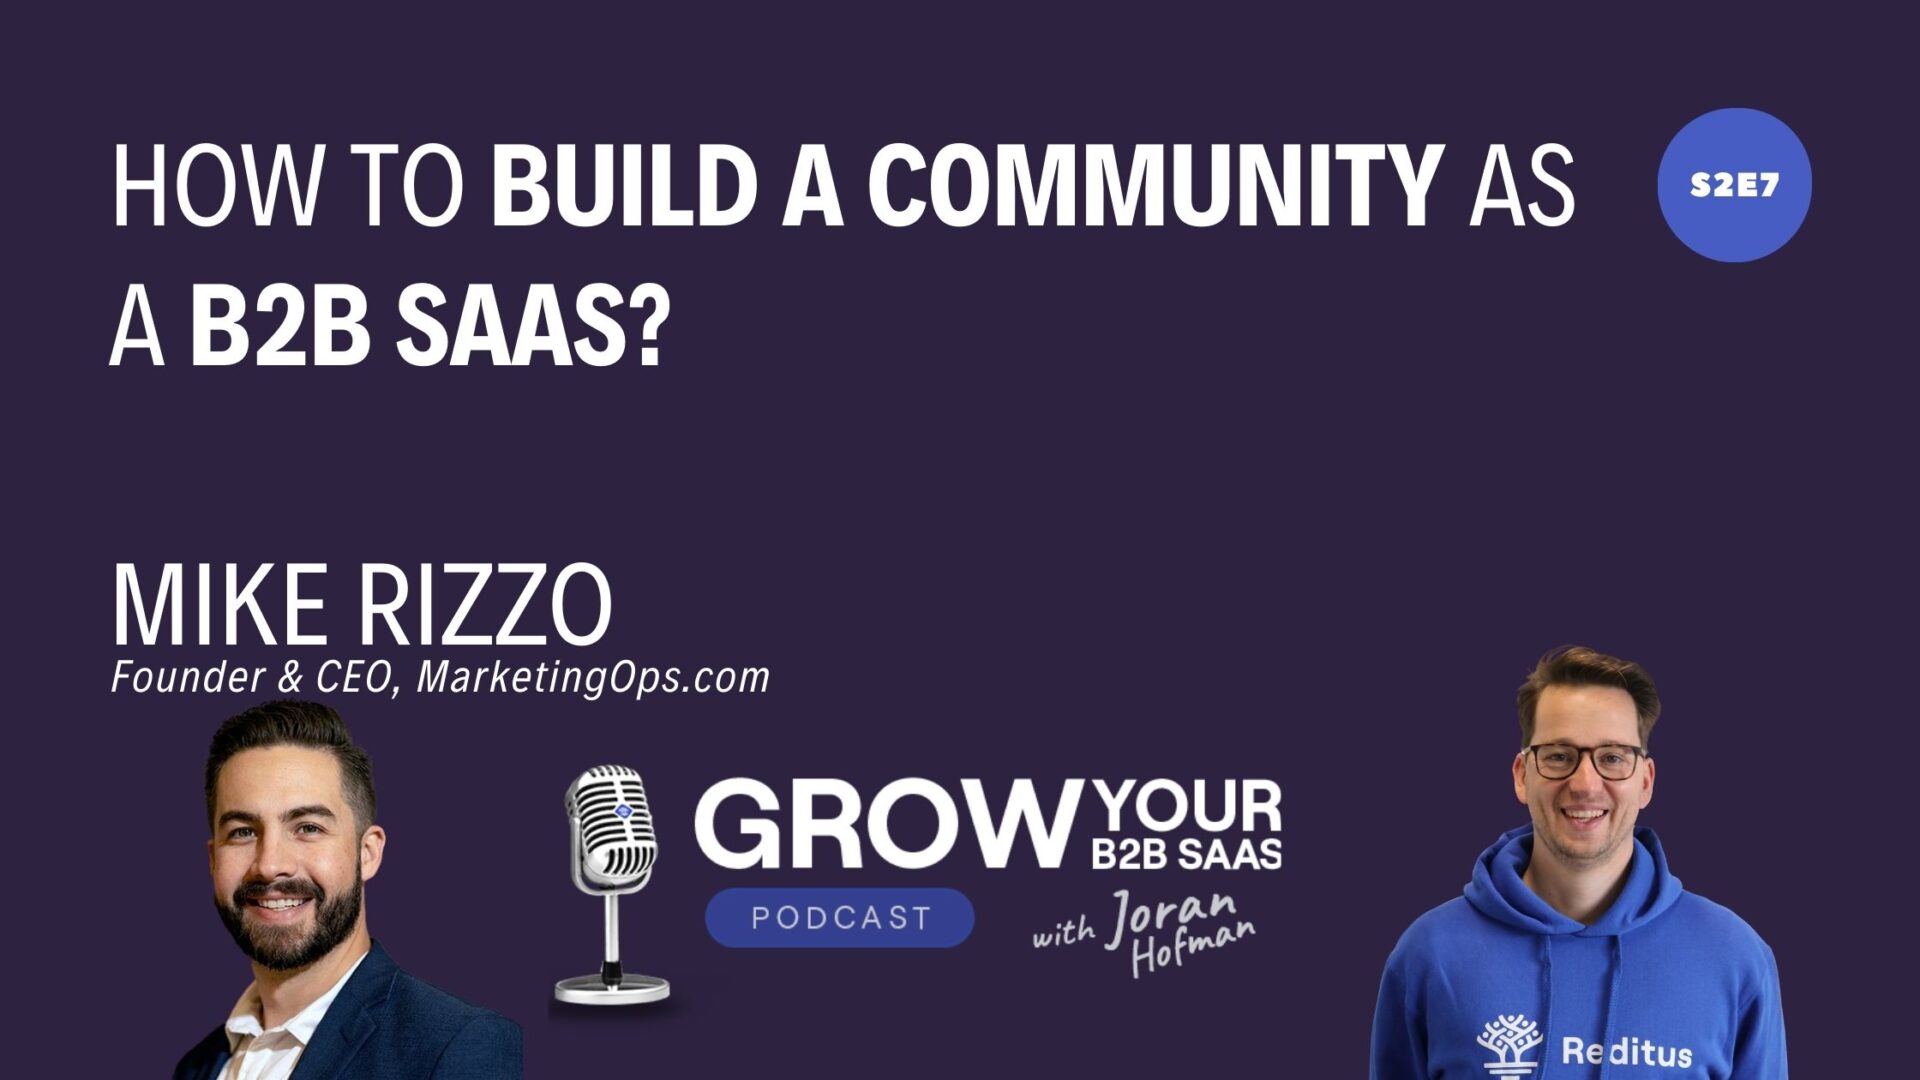 S2E7 – How to build a community as a B2B SaaS? with Mike Rizzo